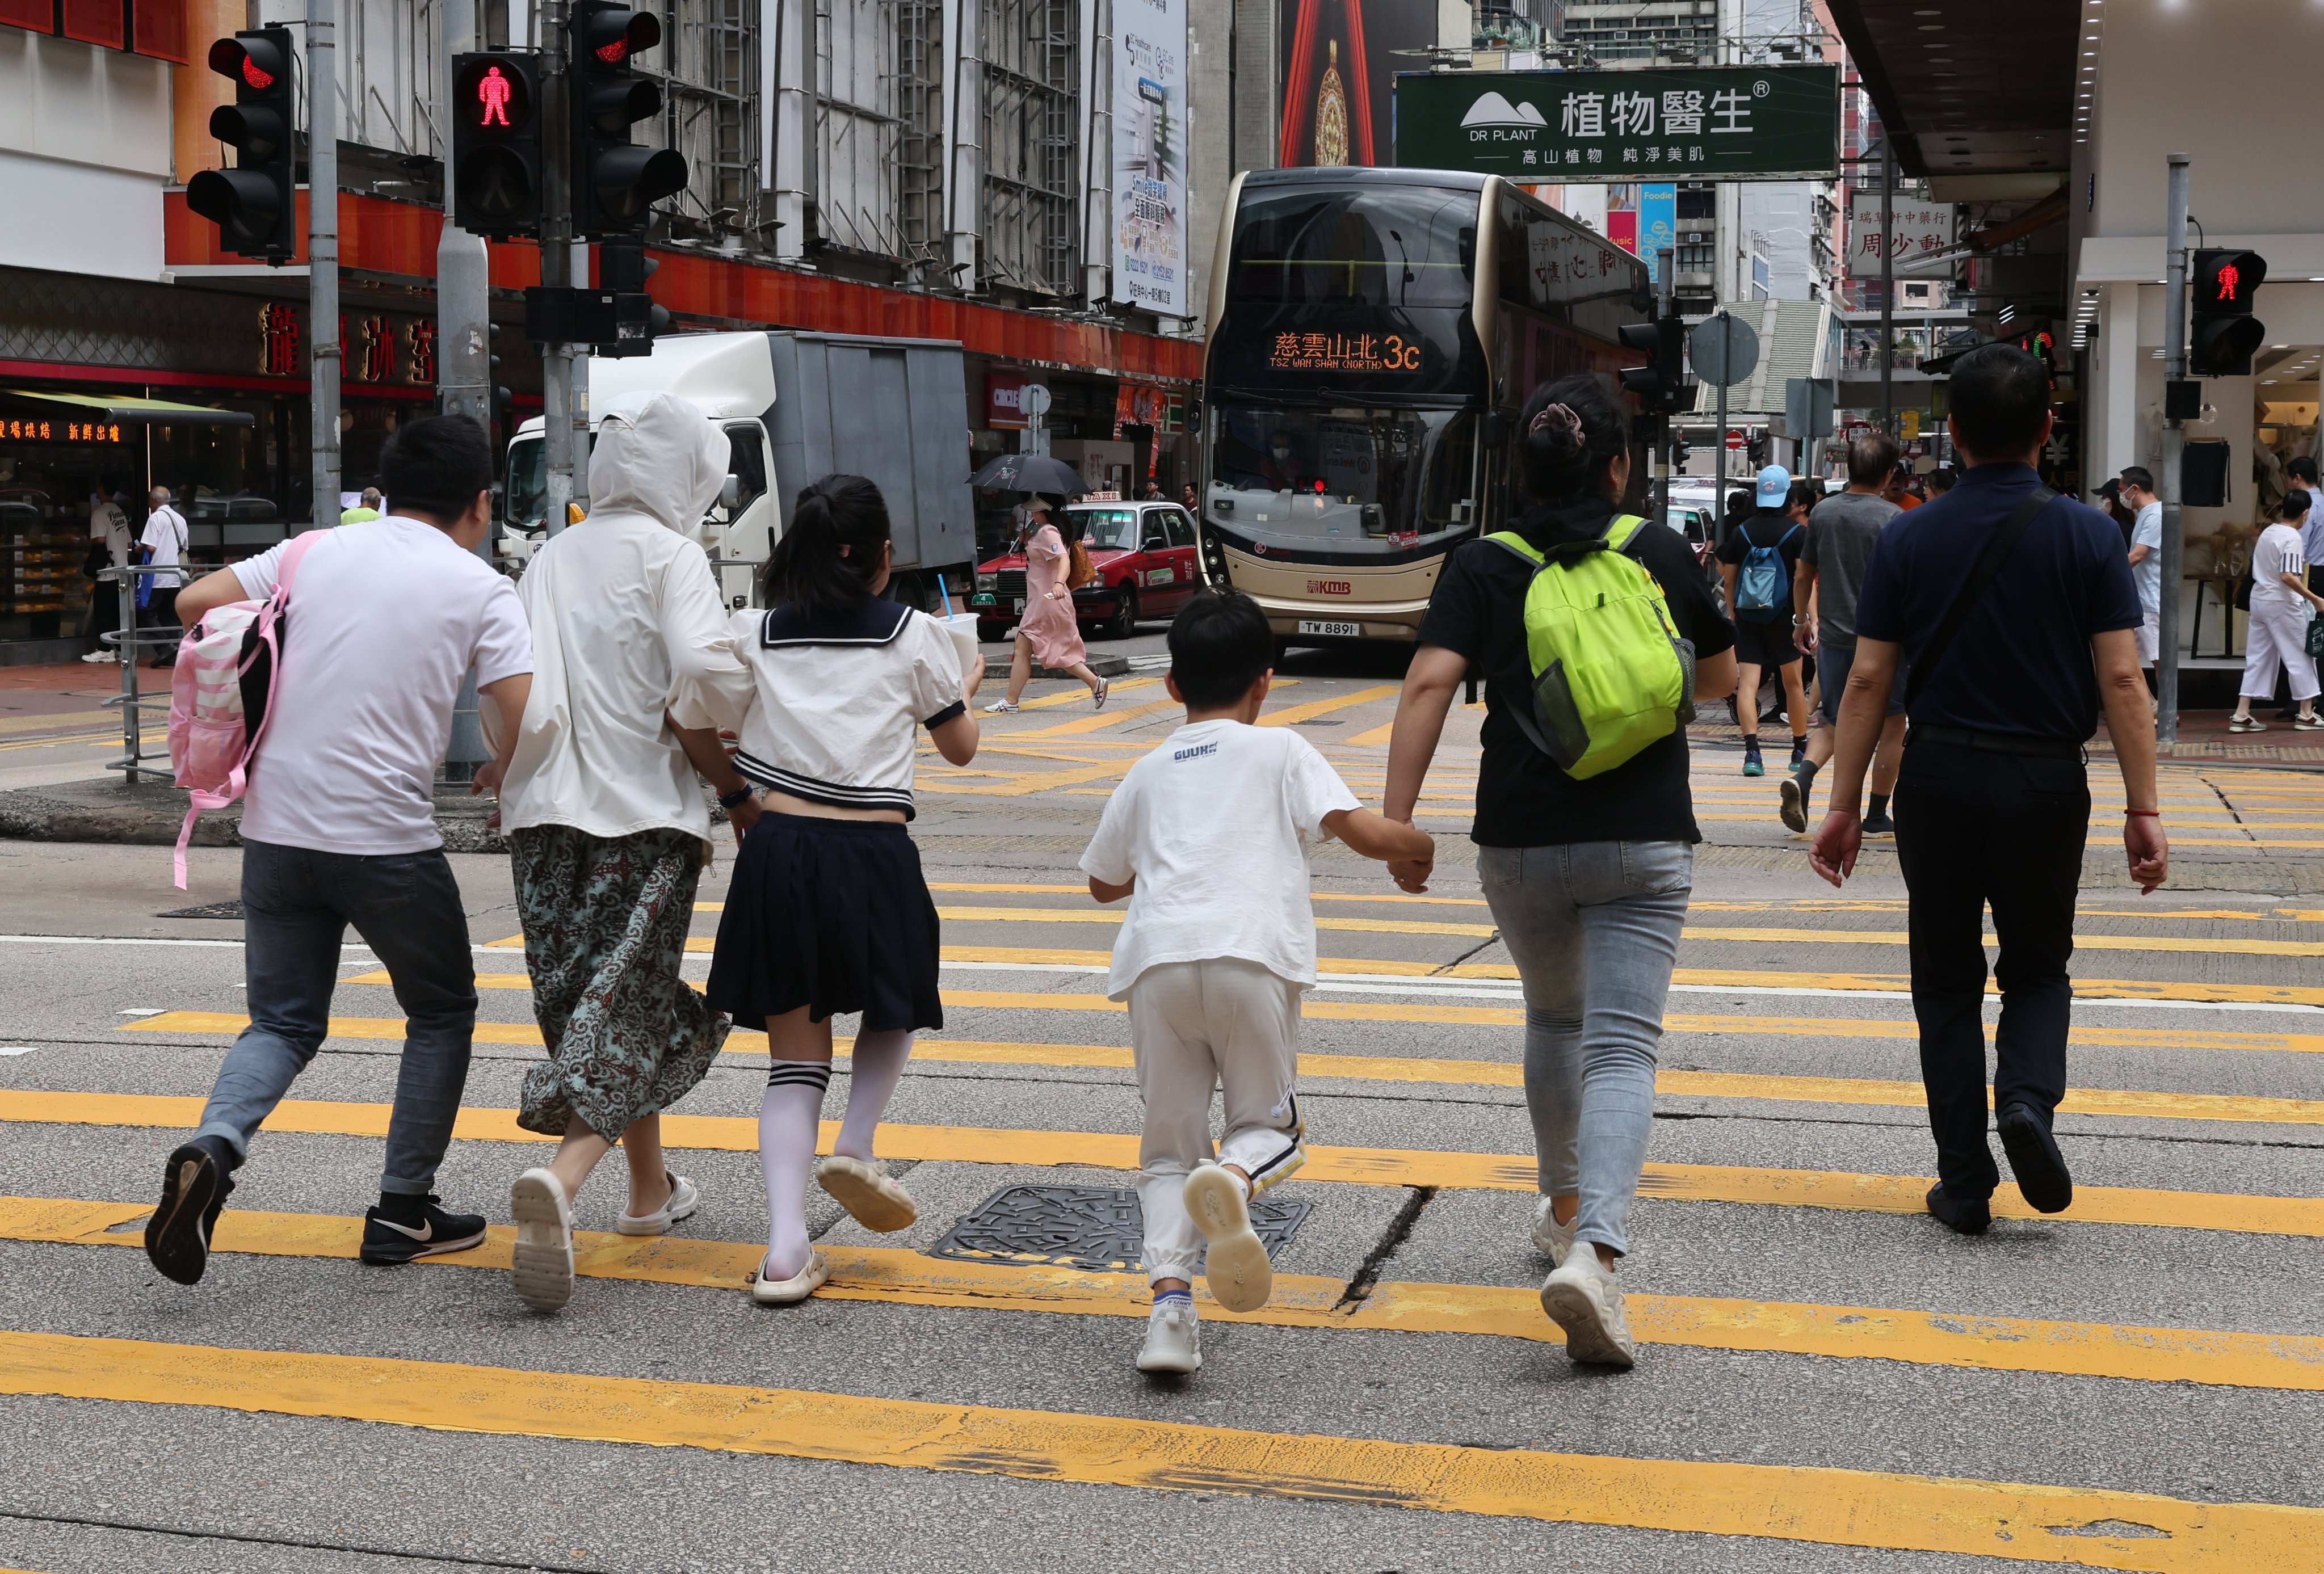 Pedestrians cross the road against a red signal in Mong Kok on August 14. The city’s police force has said it will step up enforcement action against unsafe behaviour by pedestrians and drivers after a series of accidents. Photo: Yik Yeung-man